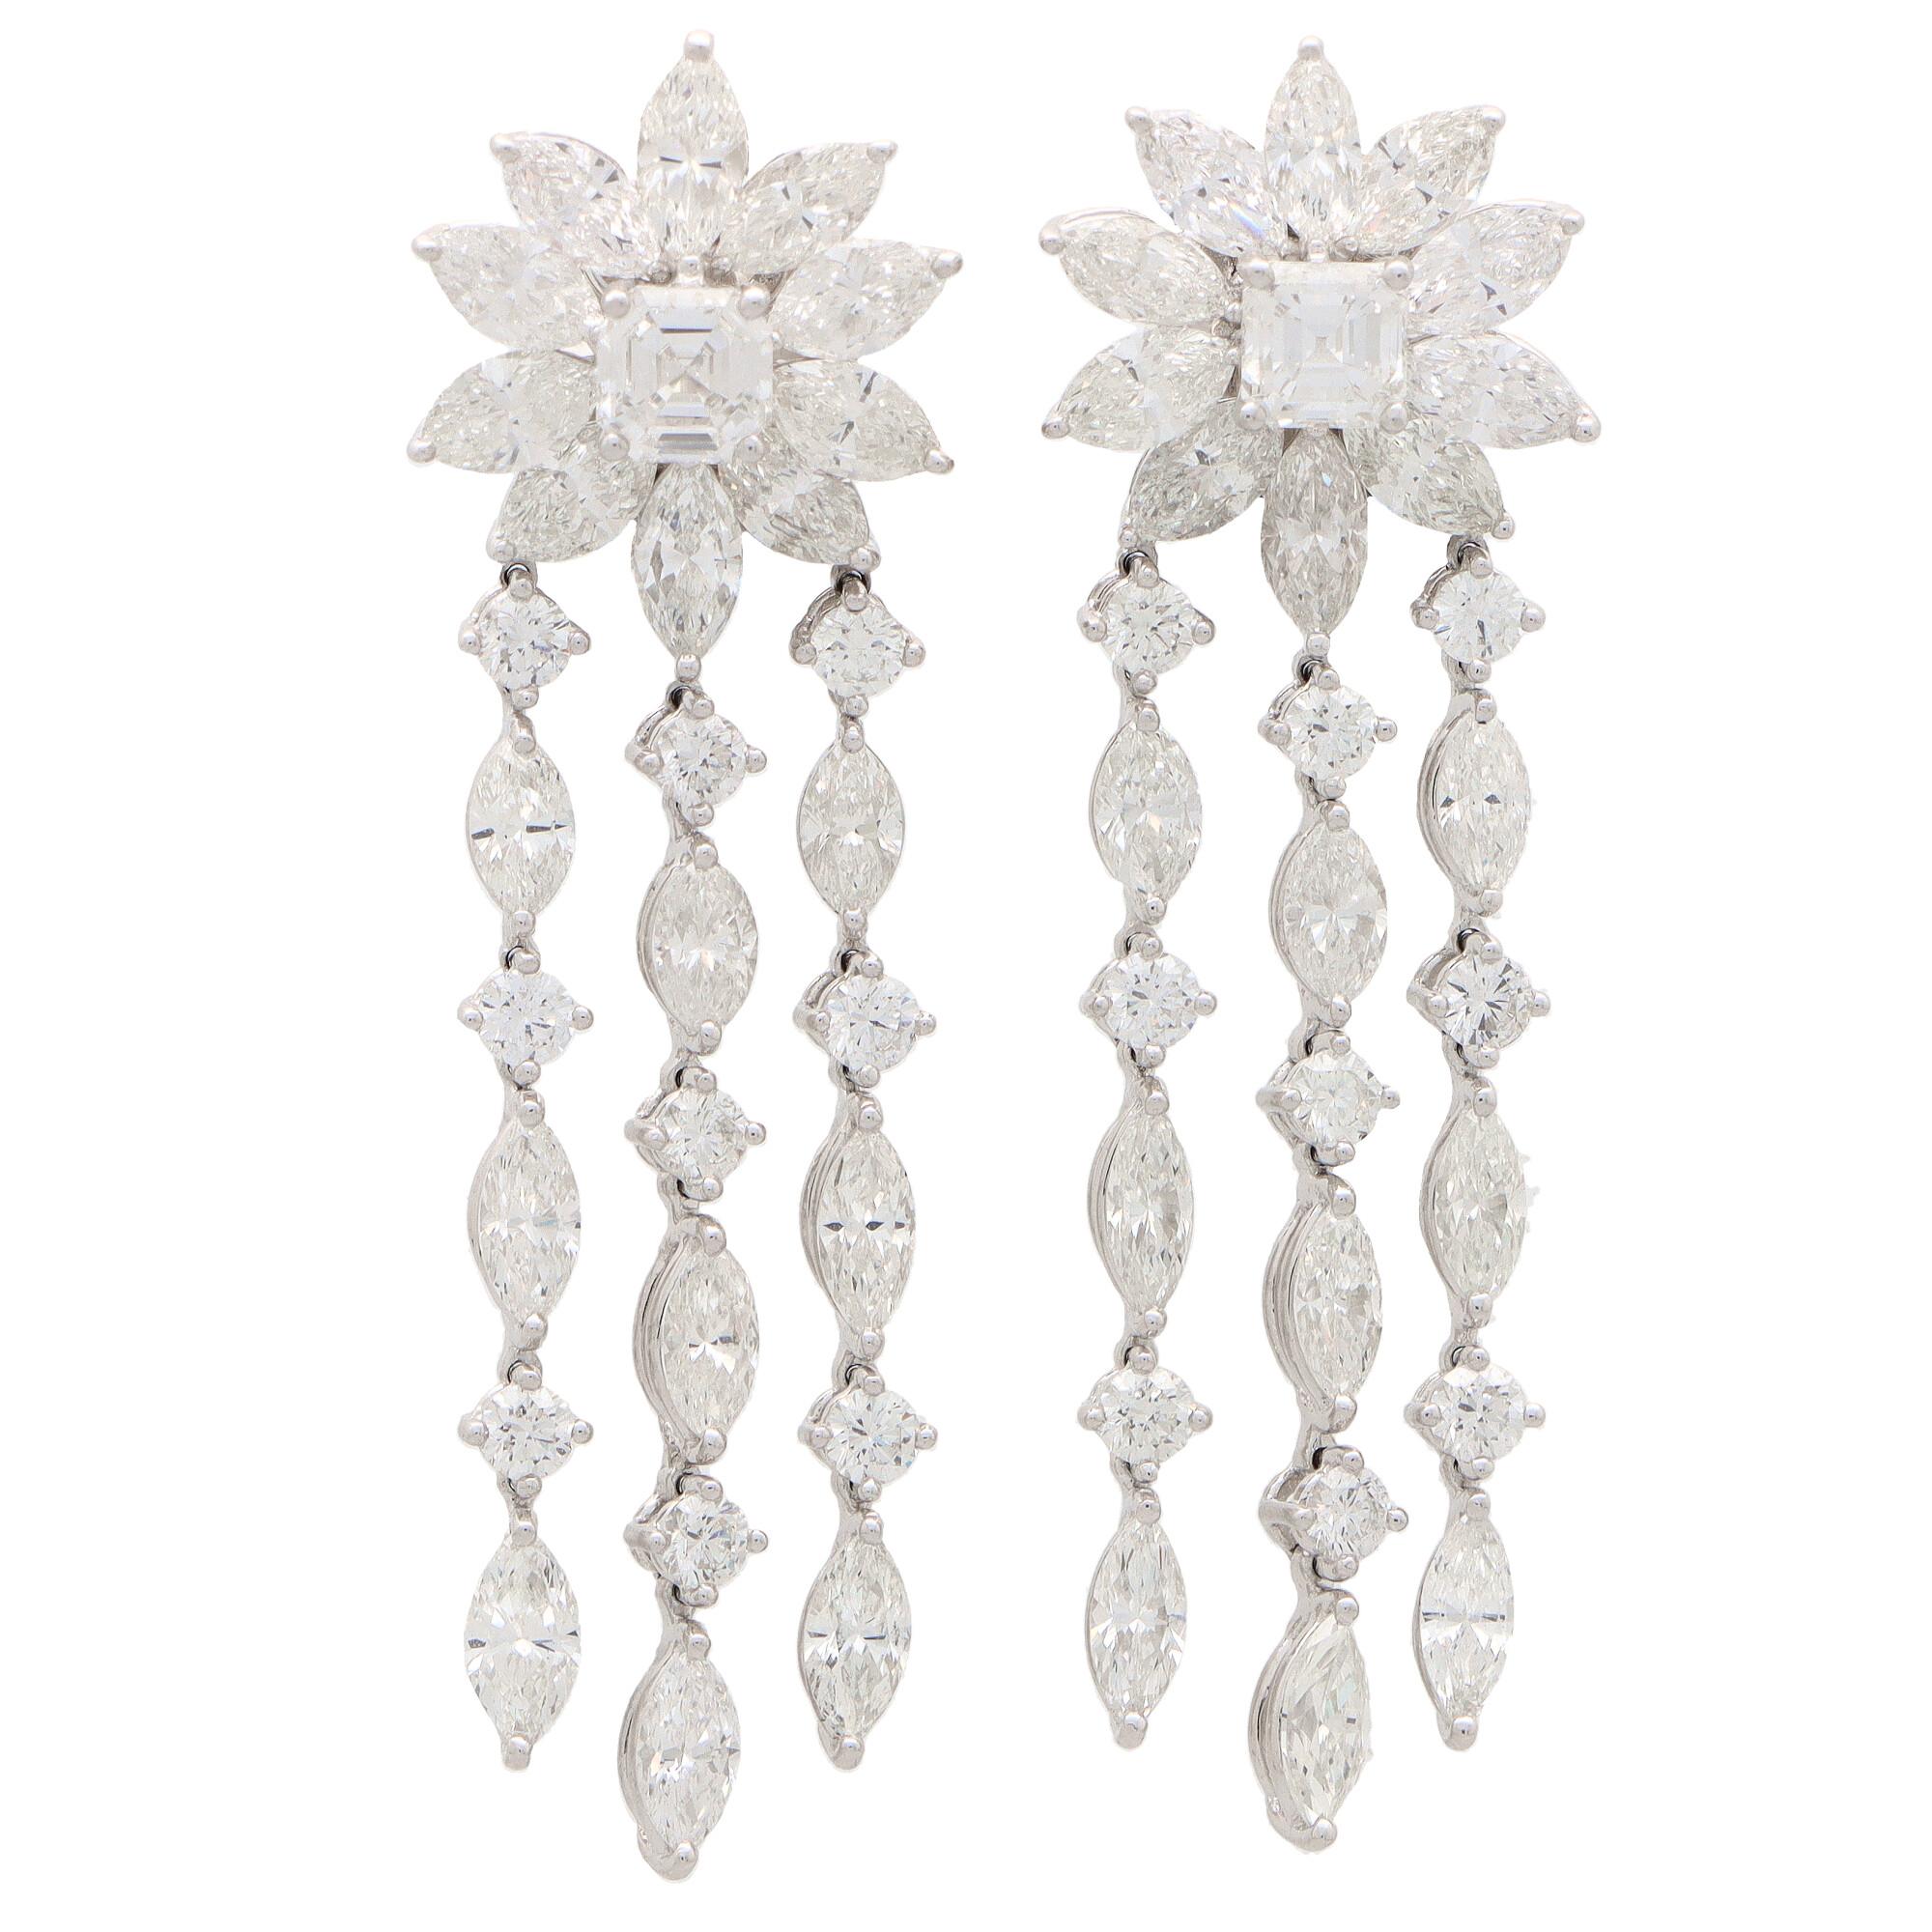 Floral Marquise and Asscher Cut Diamond Drop Earrings Set in Platinum